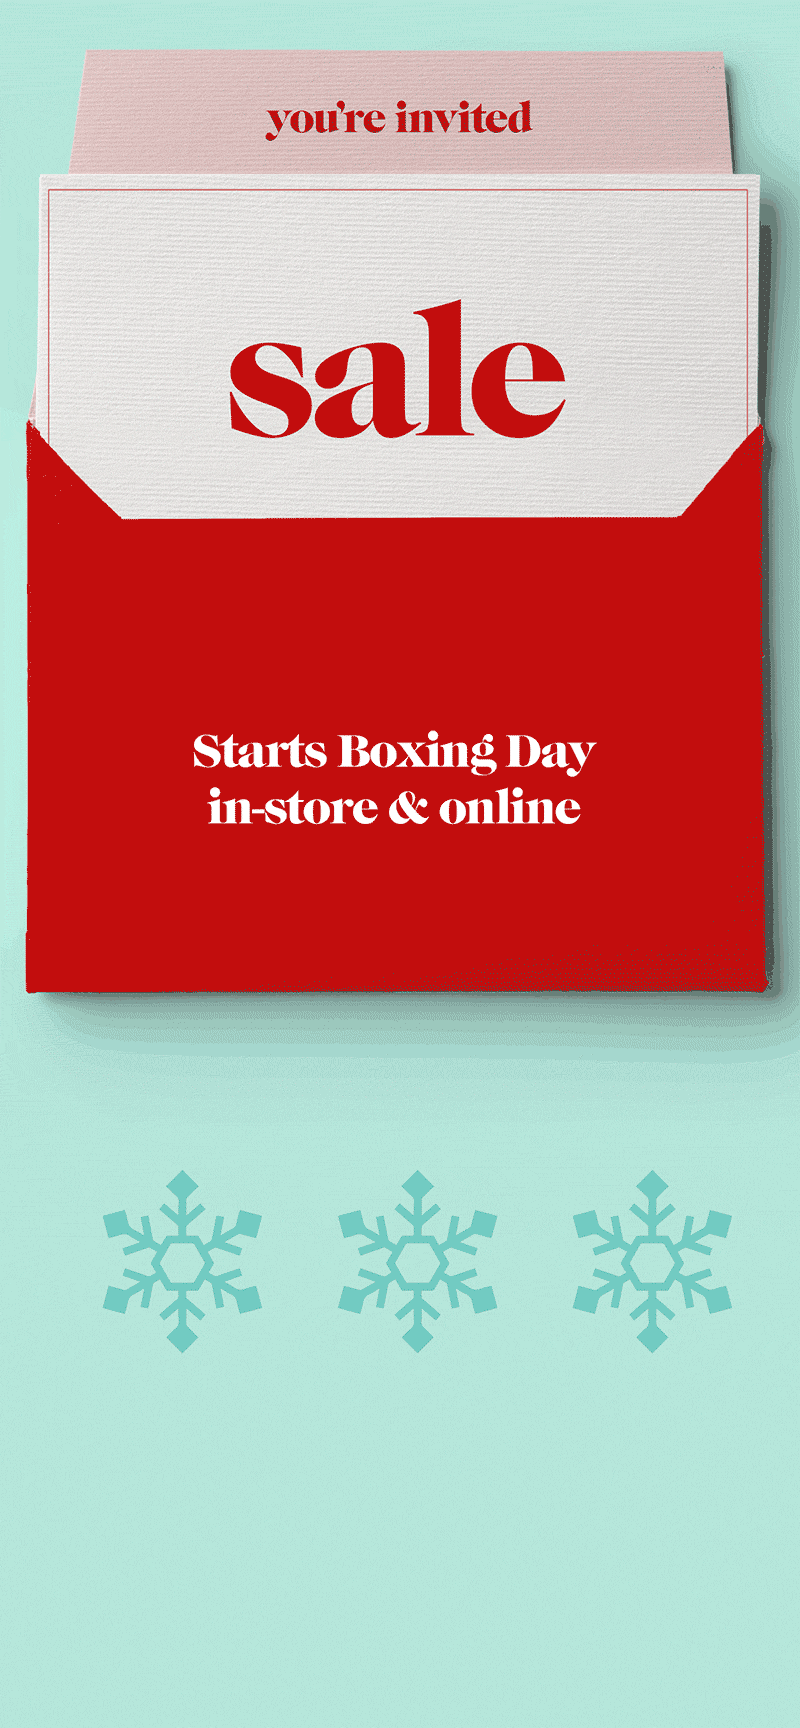 Sale coming soon at Sterling, starts Boxing Day